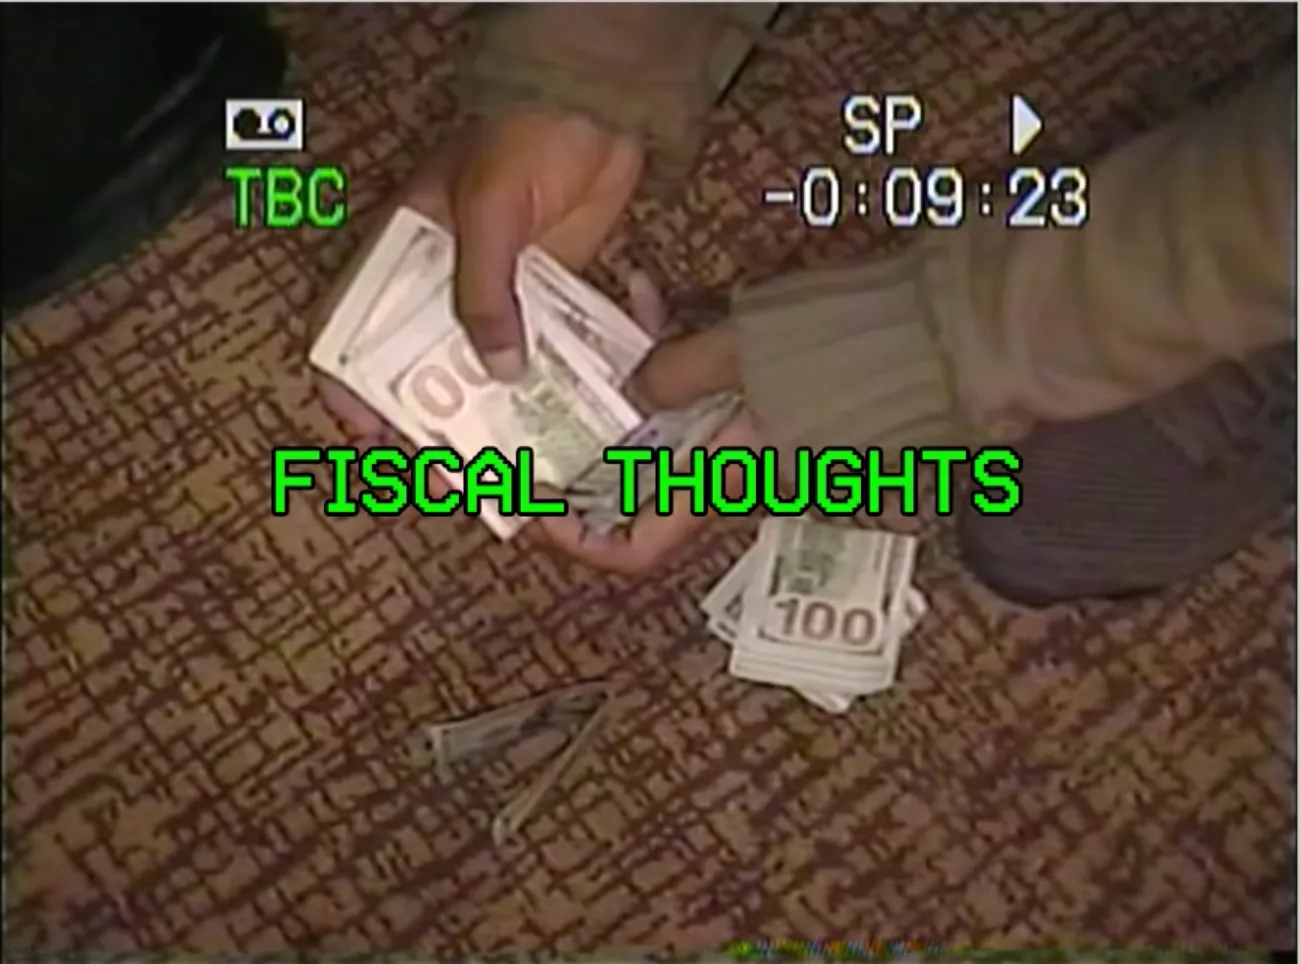 FiscalThoughts